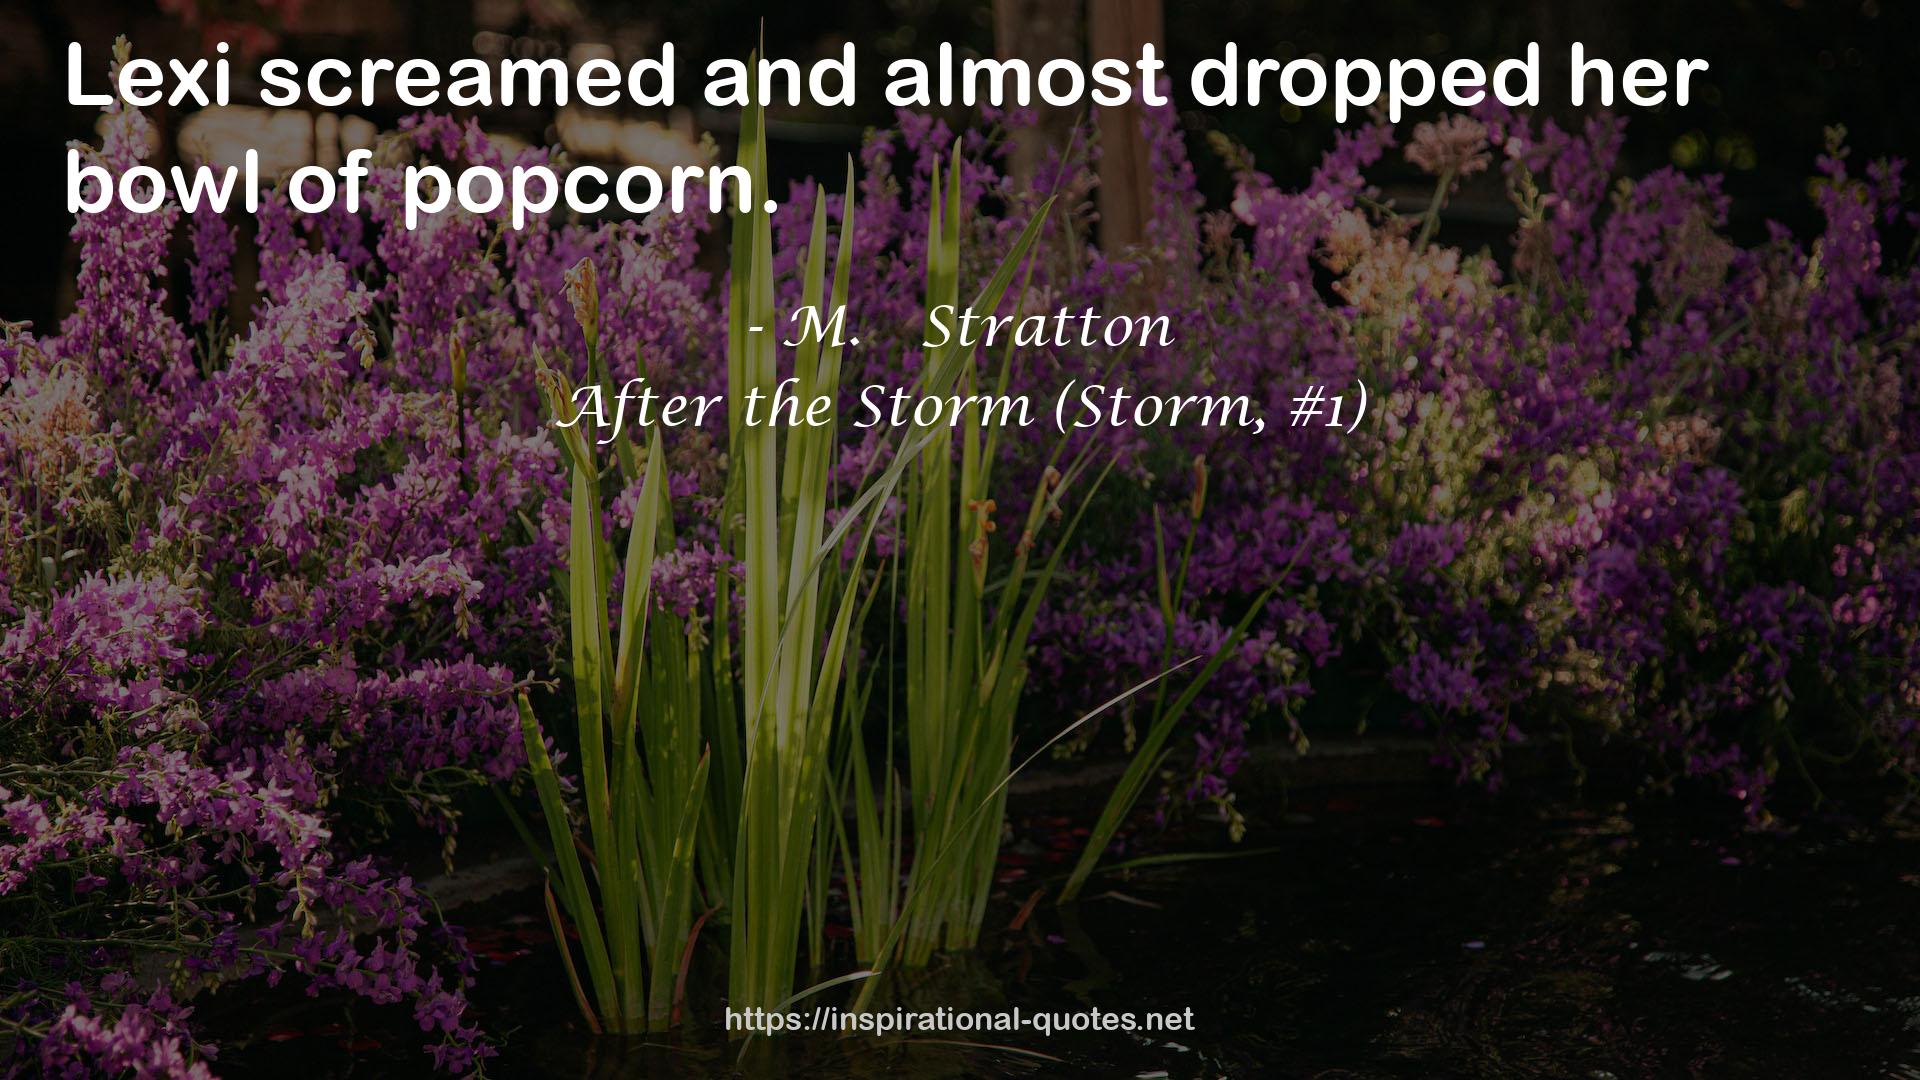 After the Storm (Storm, #1) QUOTES